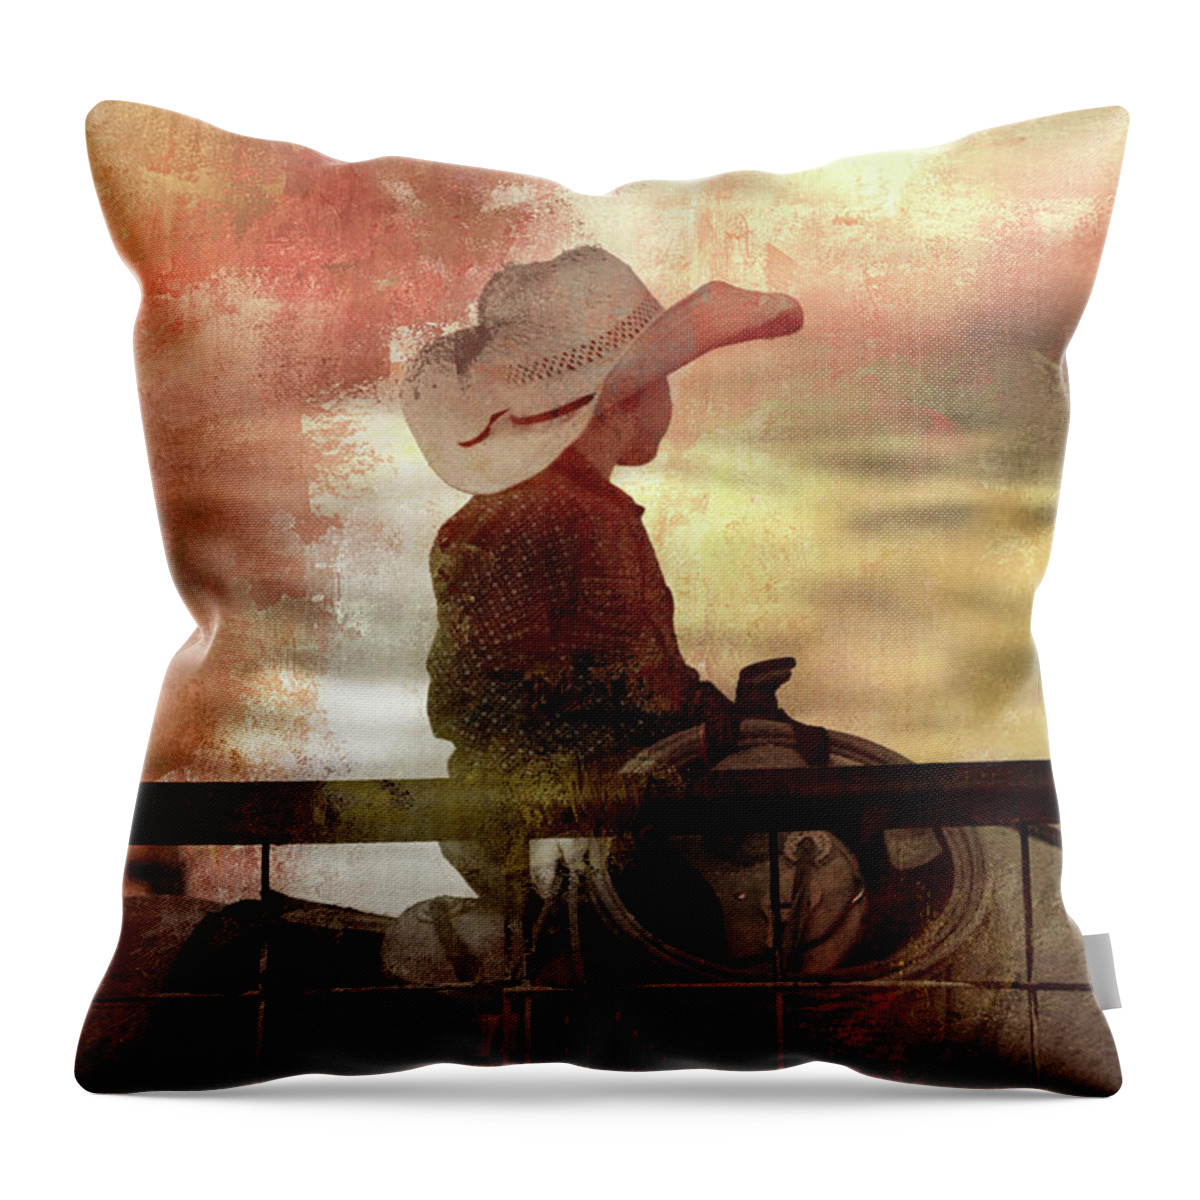 Cowboy Throw Pillow featuring the photograph Little Cowboy Ready To Rope by Toni Hopper